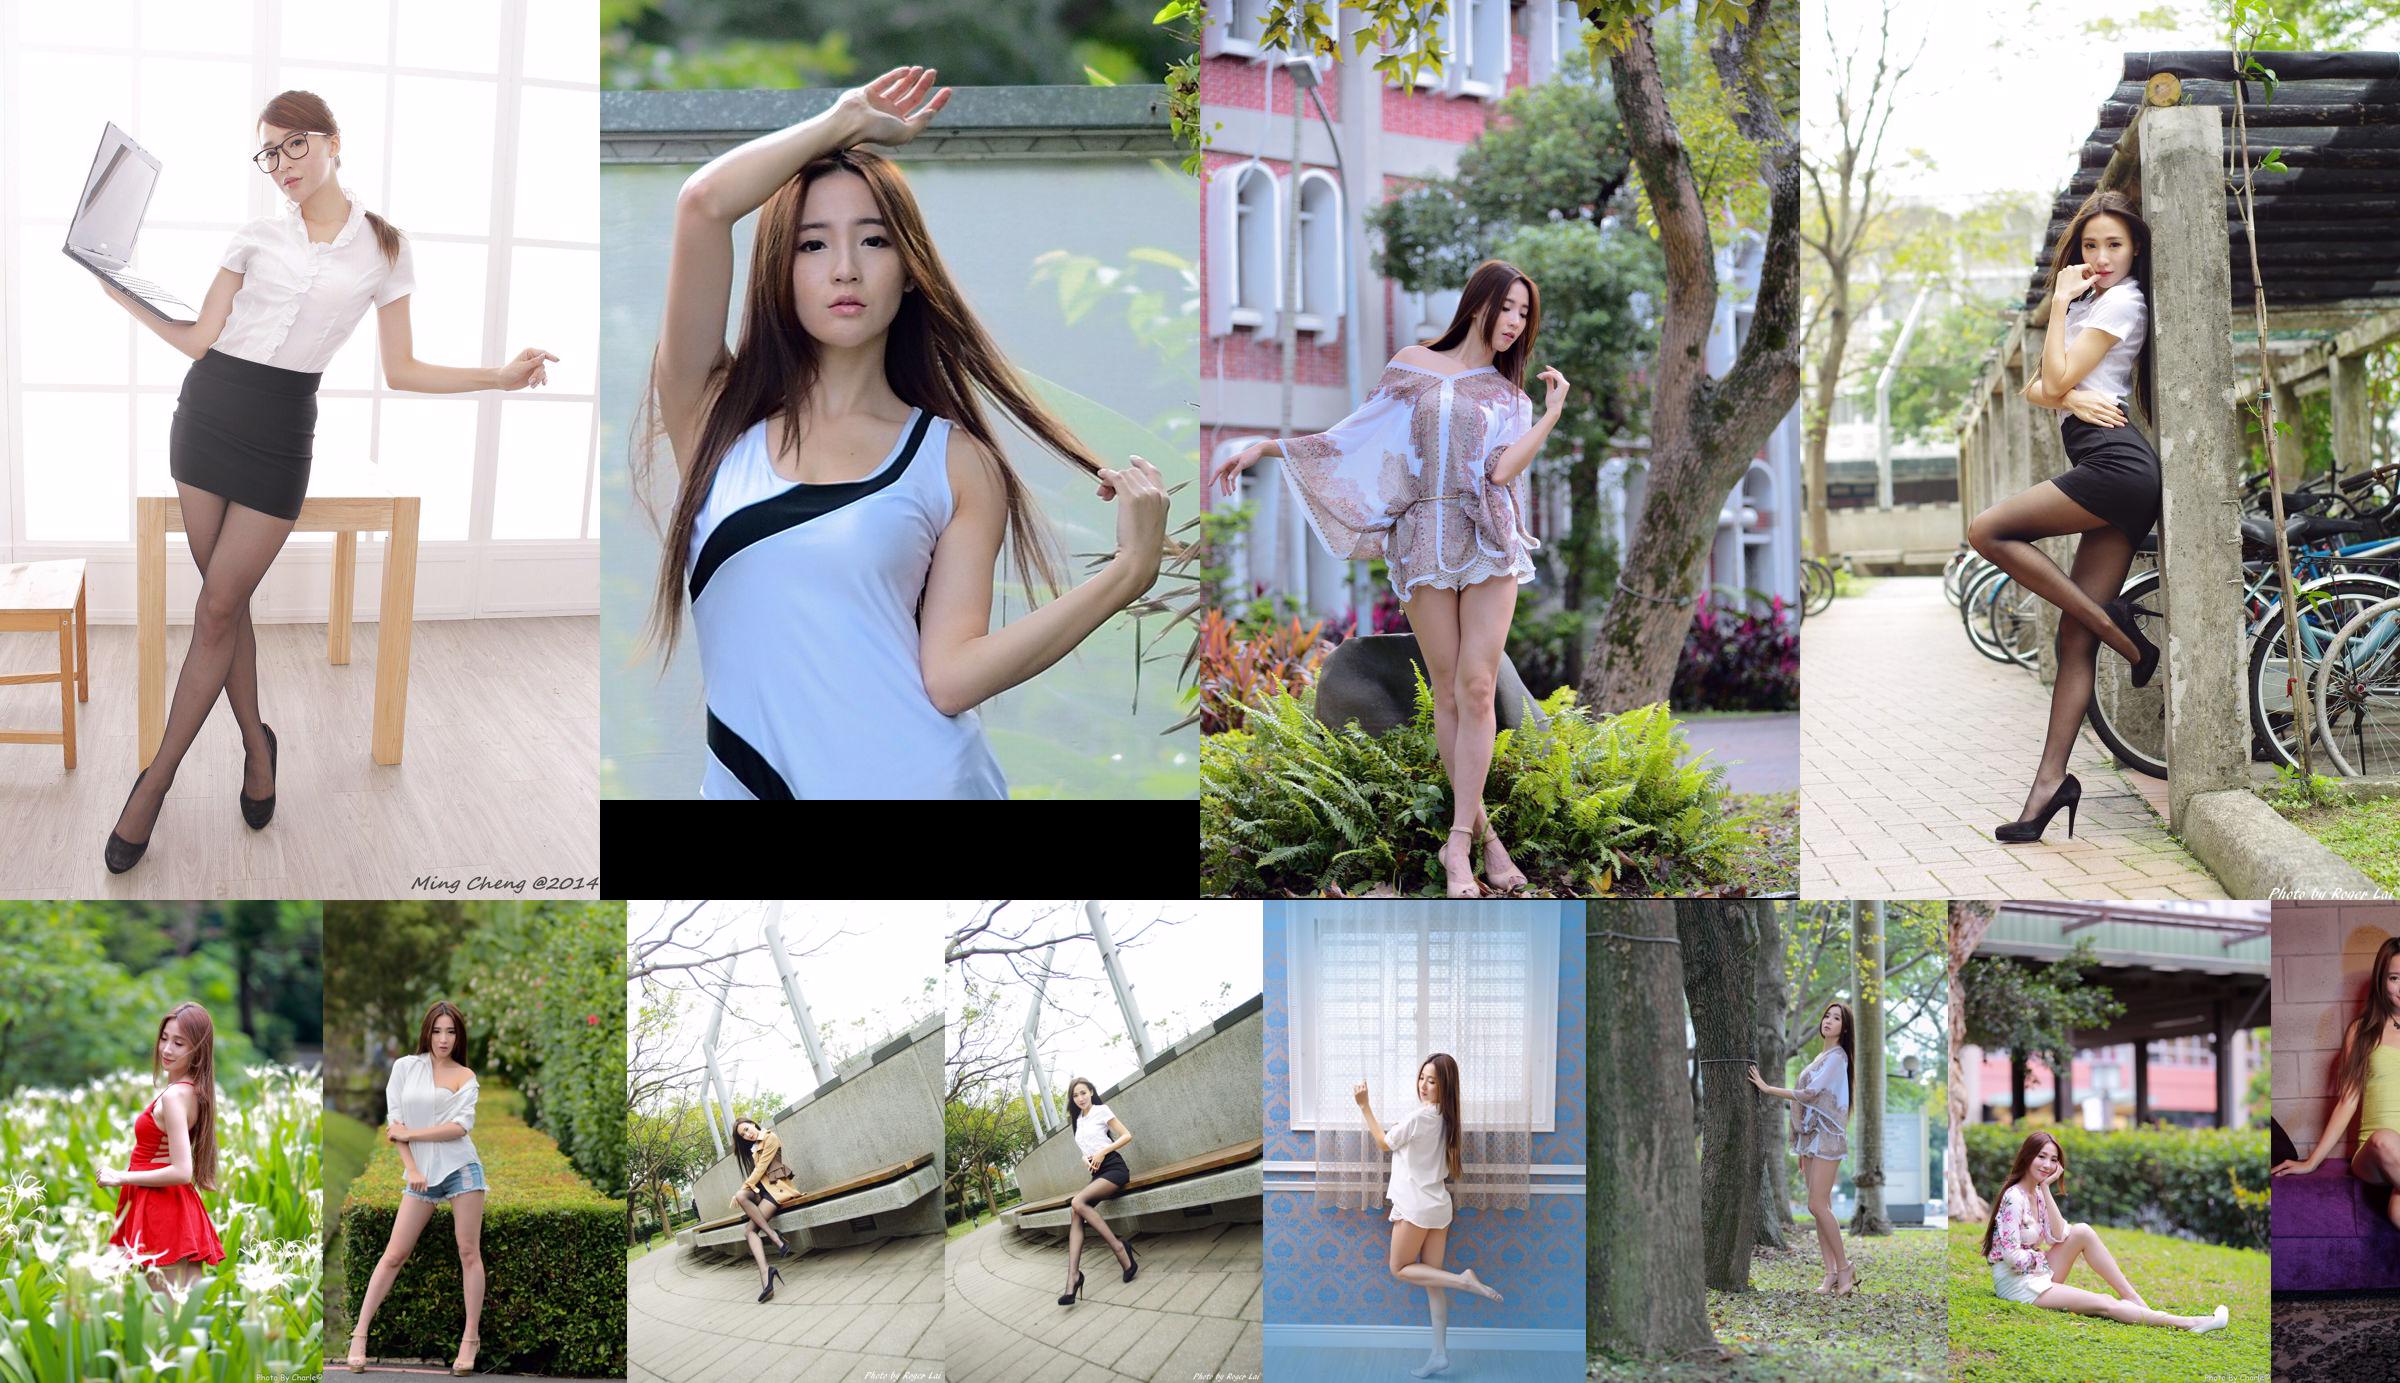 [Taiwan net celebrity beauty] Anber Anber sexy legs fashion studio shot (three outfits) No.2b977a Page 39